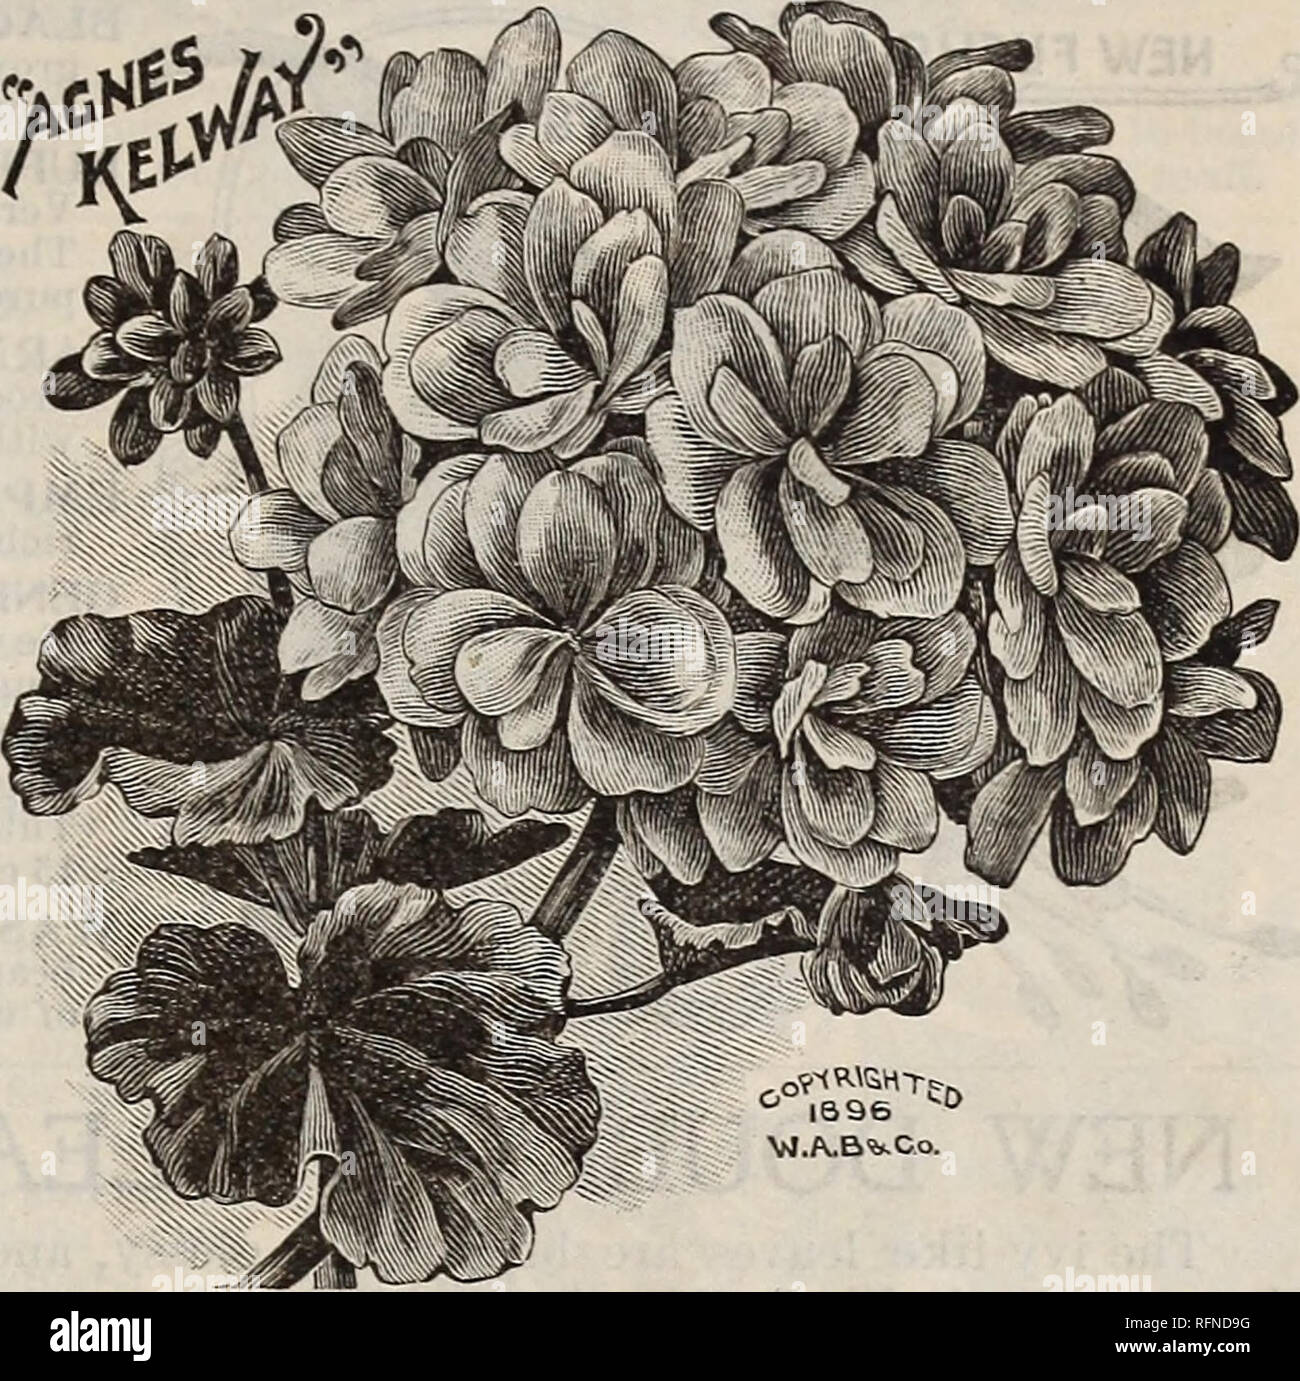 . Burpee's farm annual written at Fordhook Farm. Nurseries (Horticulture) Pennsylvania Philadelphia Catalogs; Vegetables Seeds Catalogs; Plants, Ornamental Catalogs; Flowers Seeds Catalogs. THE BEST GERANIUMS. 137 Six Superb Double GERANIUMS for 50 Cts. To the owners of large collections or to amateurs with space for but a few Geraniums, all of which must be distinct and of the very best, we confidently recommend the six named below as the very finest horticulture has yet produced. They include choice novelties of the year,—and if purchased separately these six would cost ninety =five cents. A Stock Photo